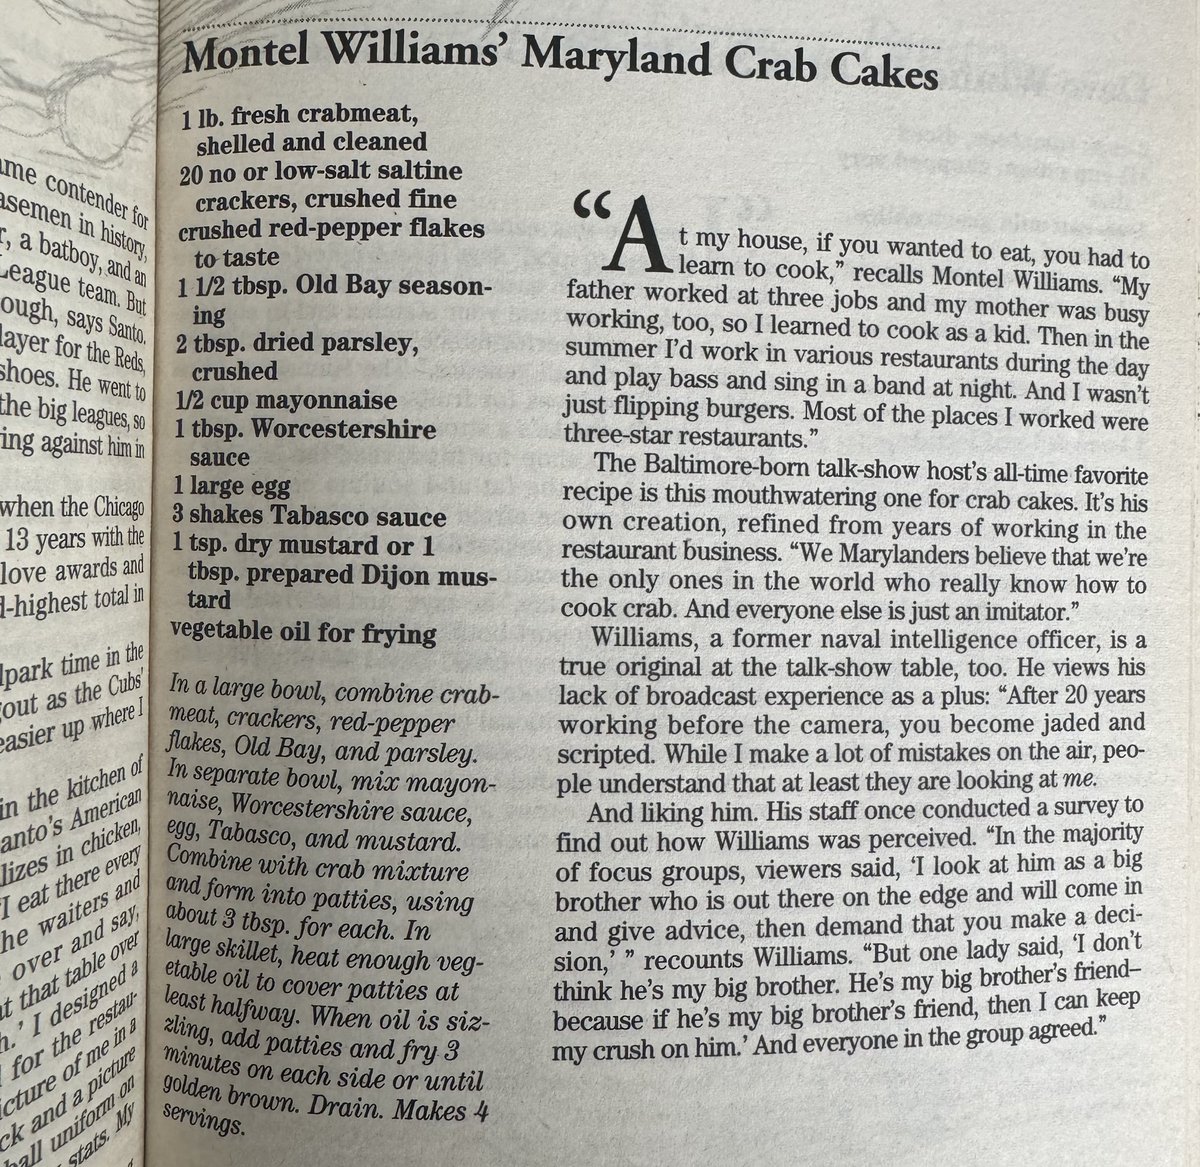 Mr. Williams and his famous son Montel Williams can throw down in the kitchen, often cooking for disabled veterans. Fun fact: the crab cake recipe I use comes from Montel Williams via a 1994 TV Guide. Thank you for your service and your recipe! @Montel_Williams